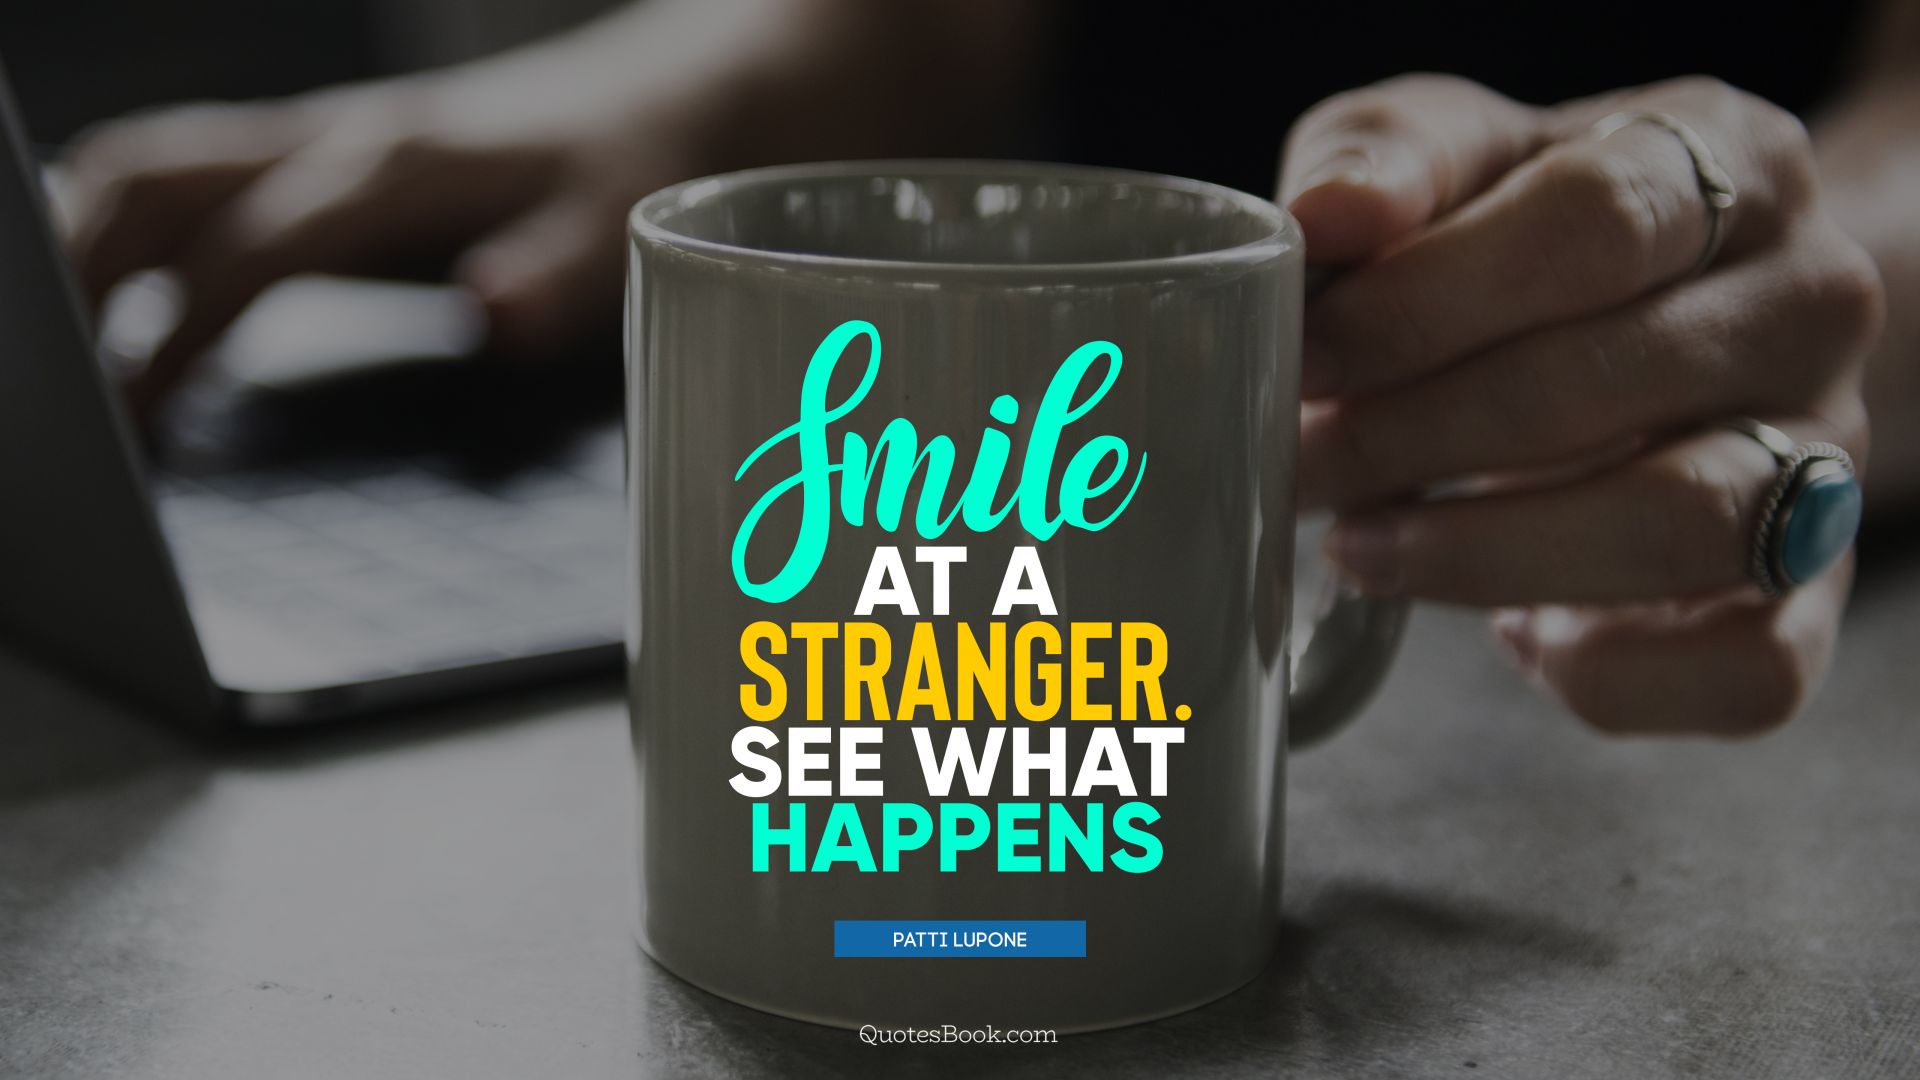 Smile at a stranger. See what happens. - Quote by Patti LuPone